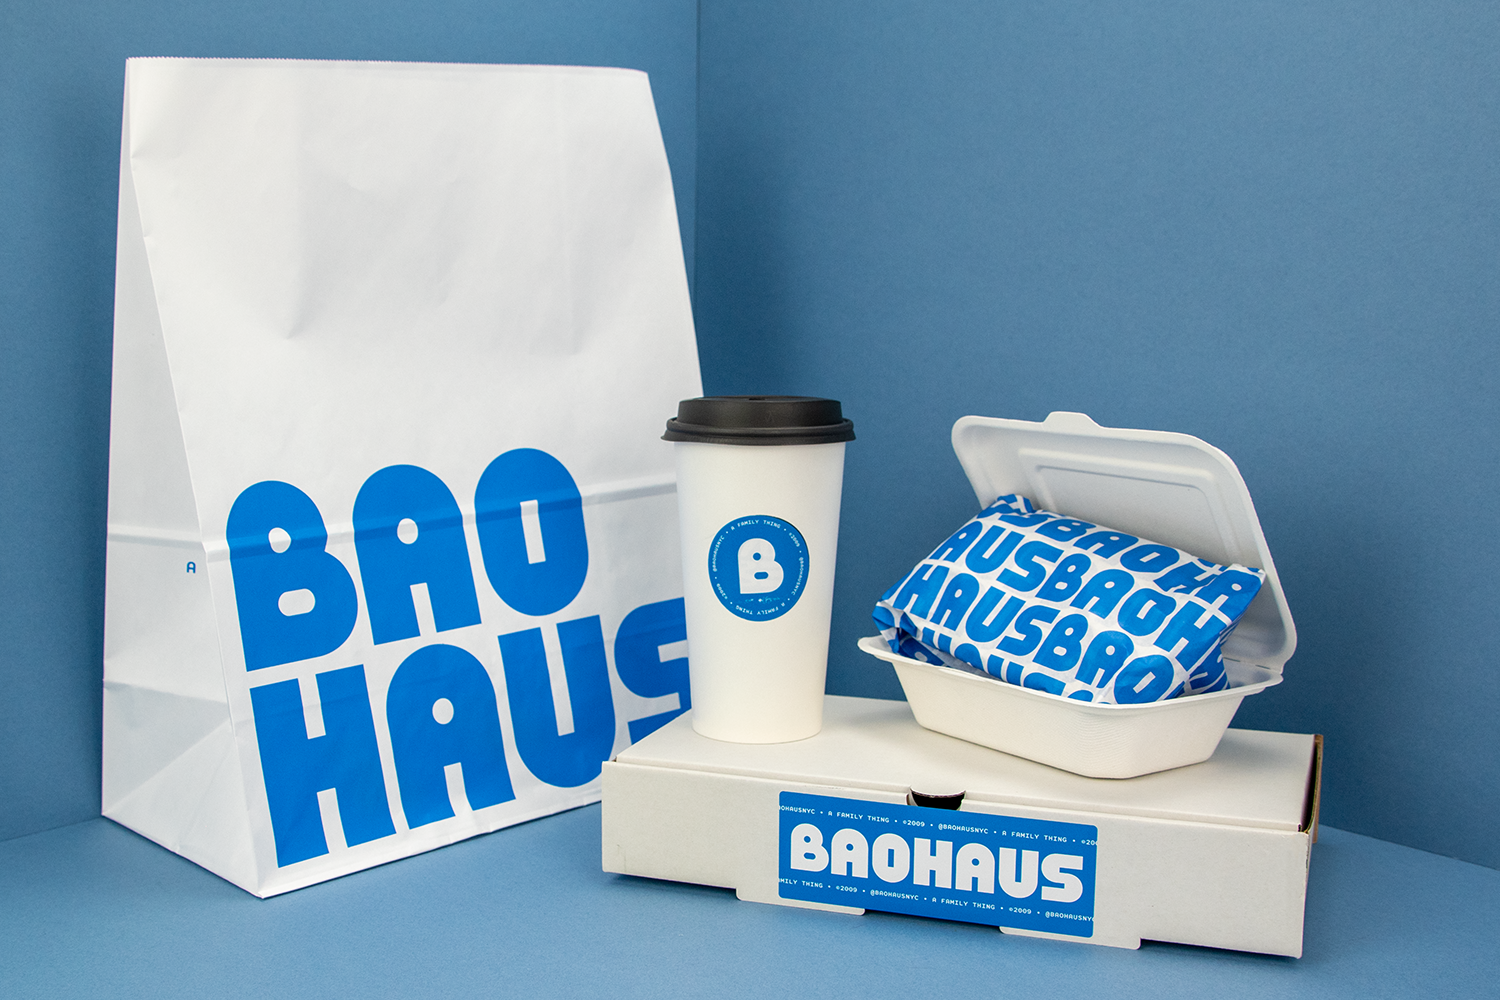 https://takeawaypackaging.co.uk/wp-content/uploads/2021/01/Baohaus-bags-stickers-and-greaseproof-paper-3-copy-2.webp